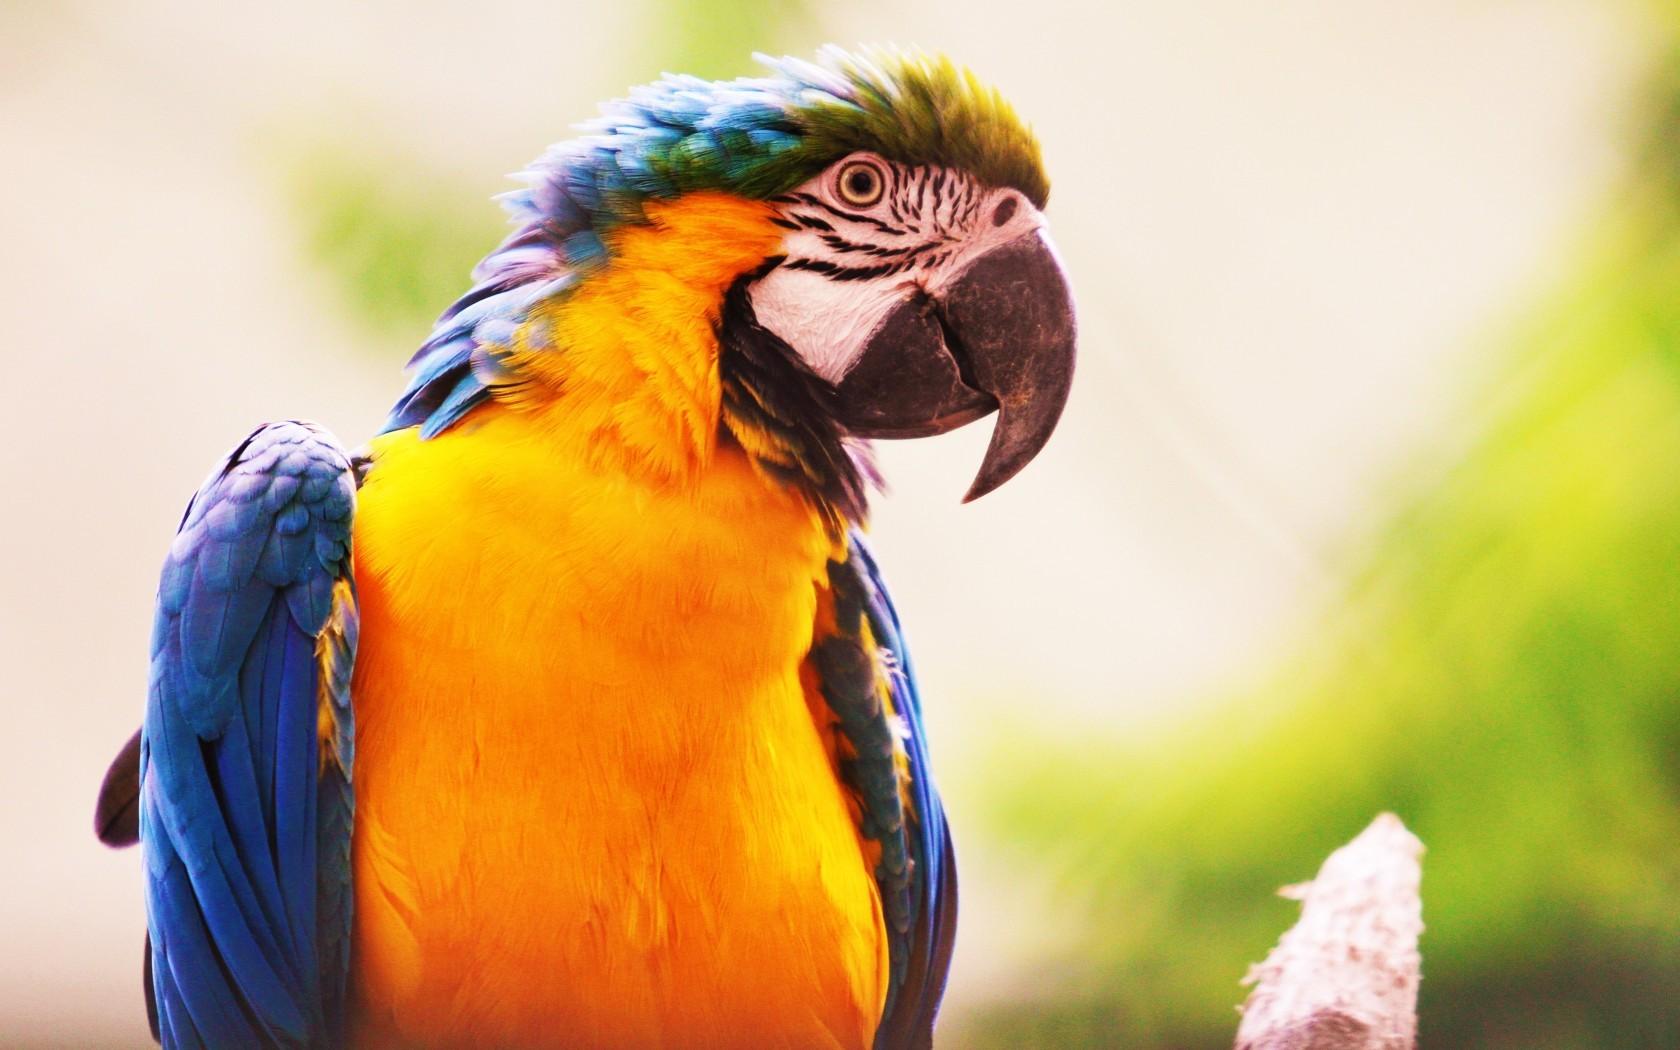 Download 1680x1050 Parrot, Birds, Close Up, Profile View, Macaw